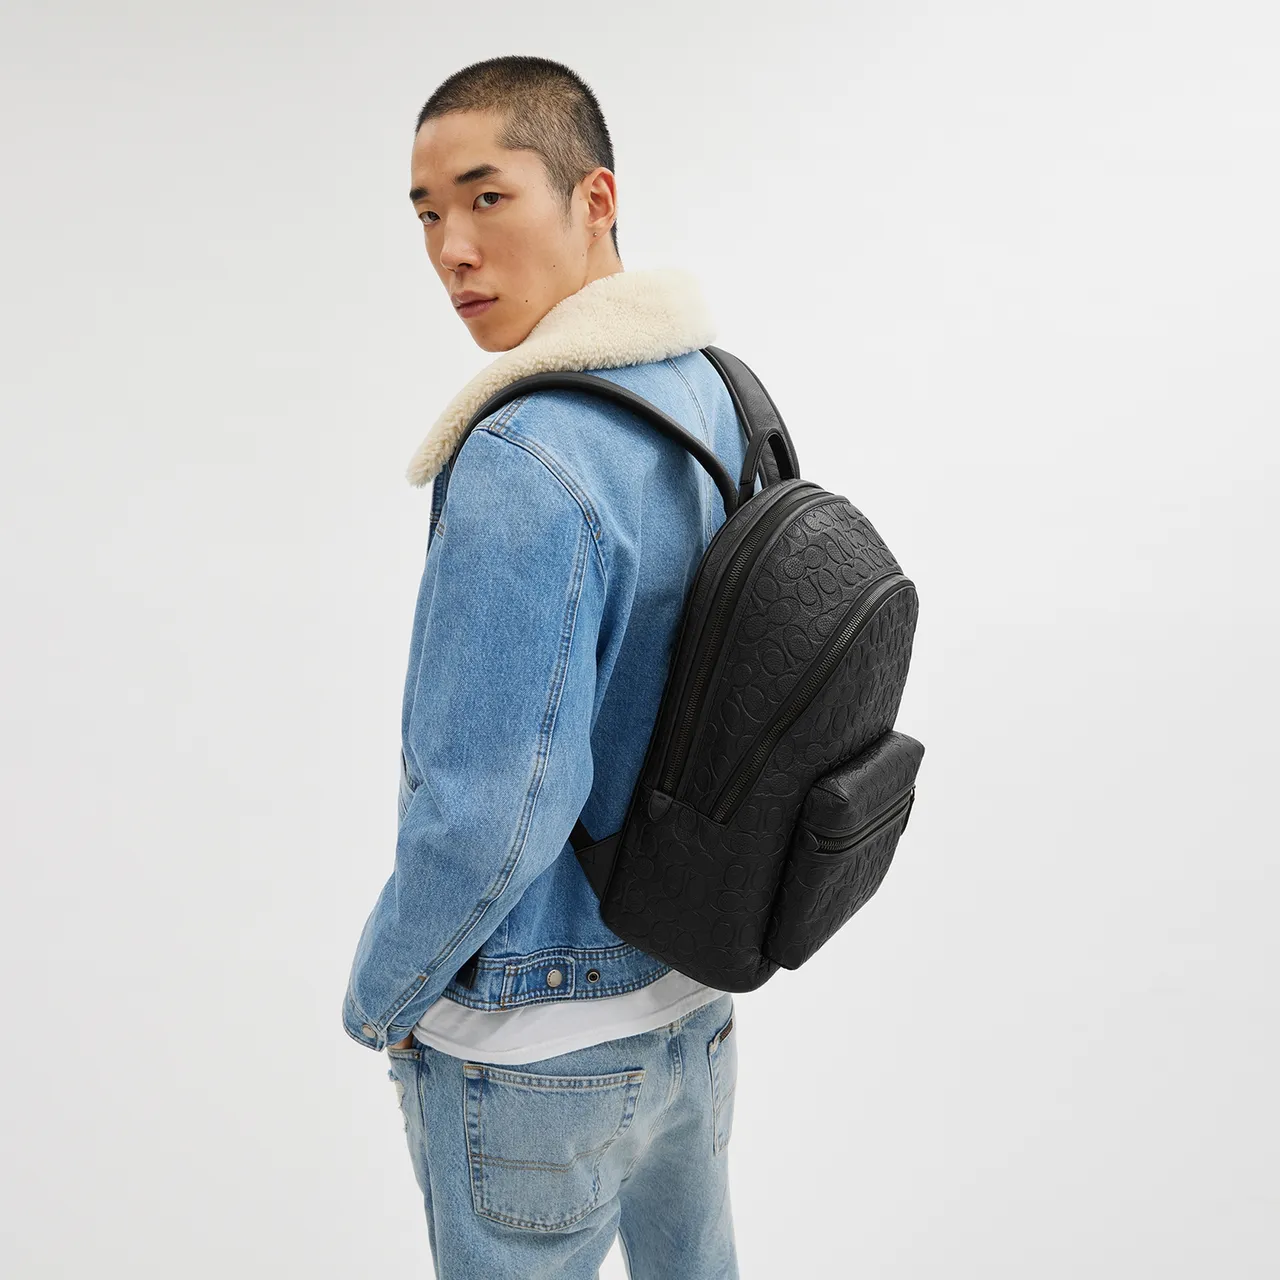 Coach Charter Signature Debossed Pebble Leather Backpack